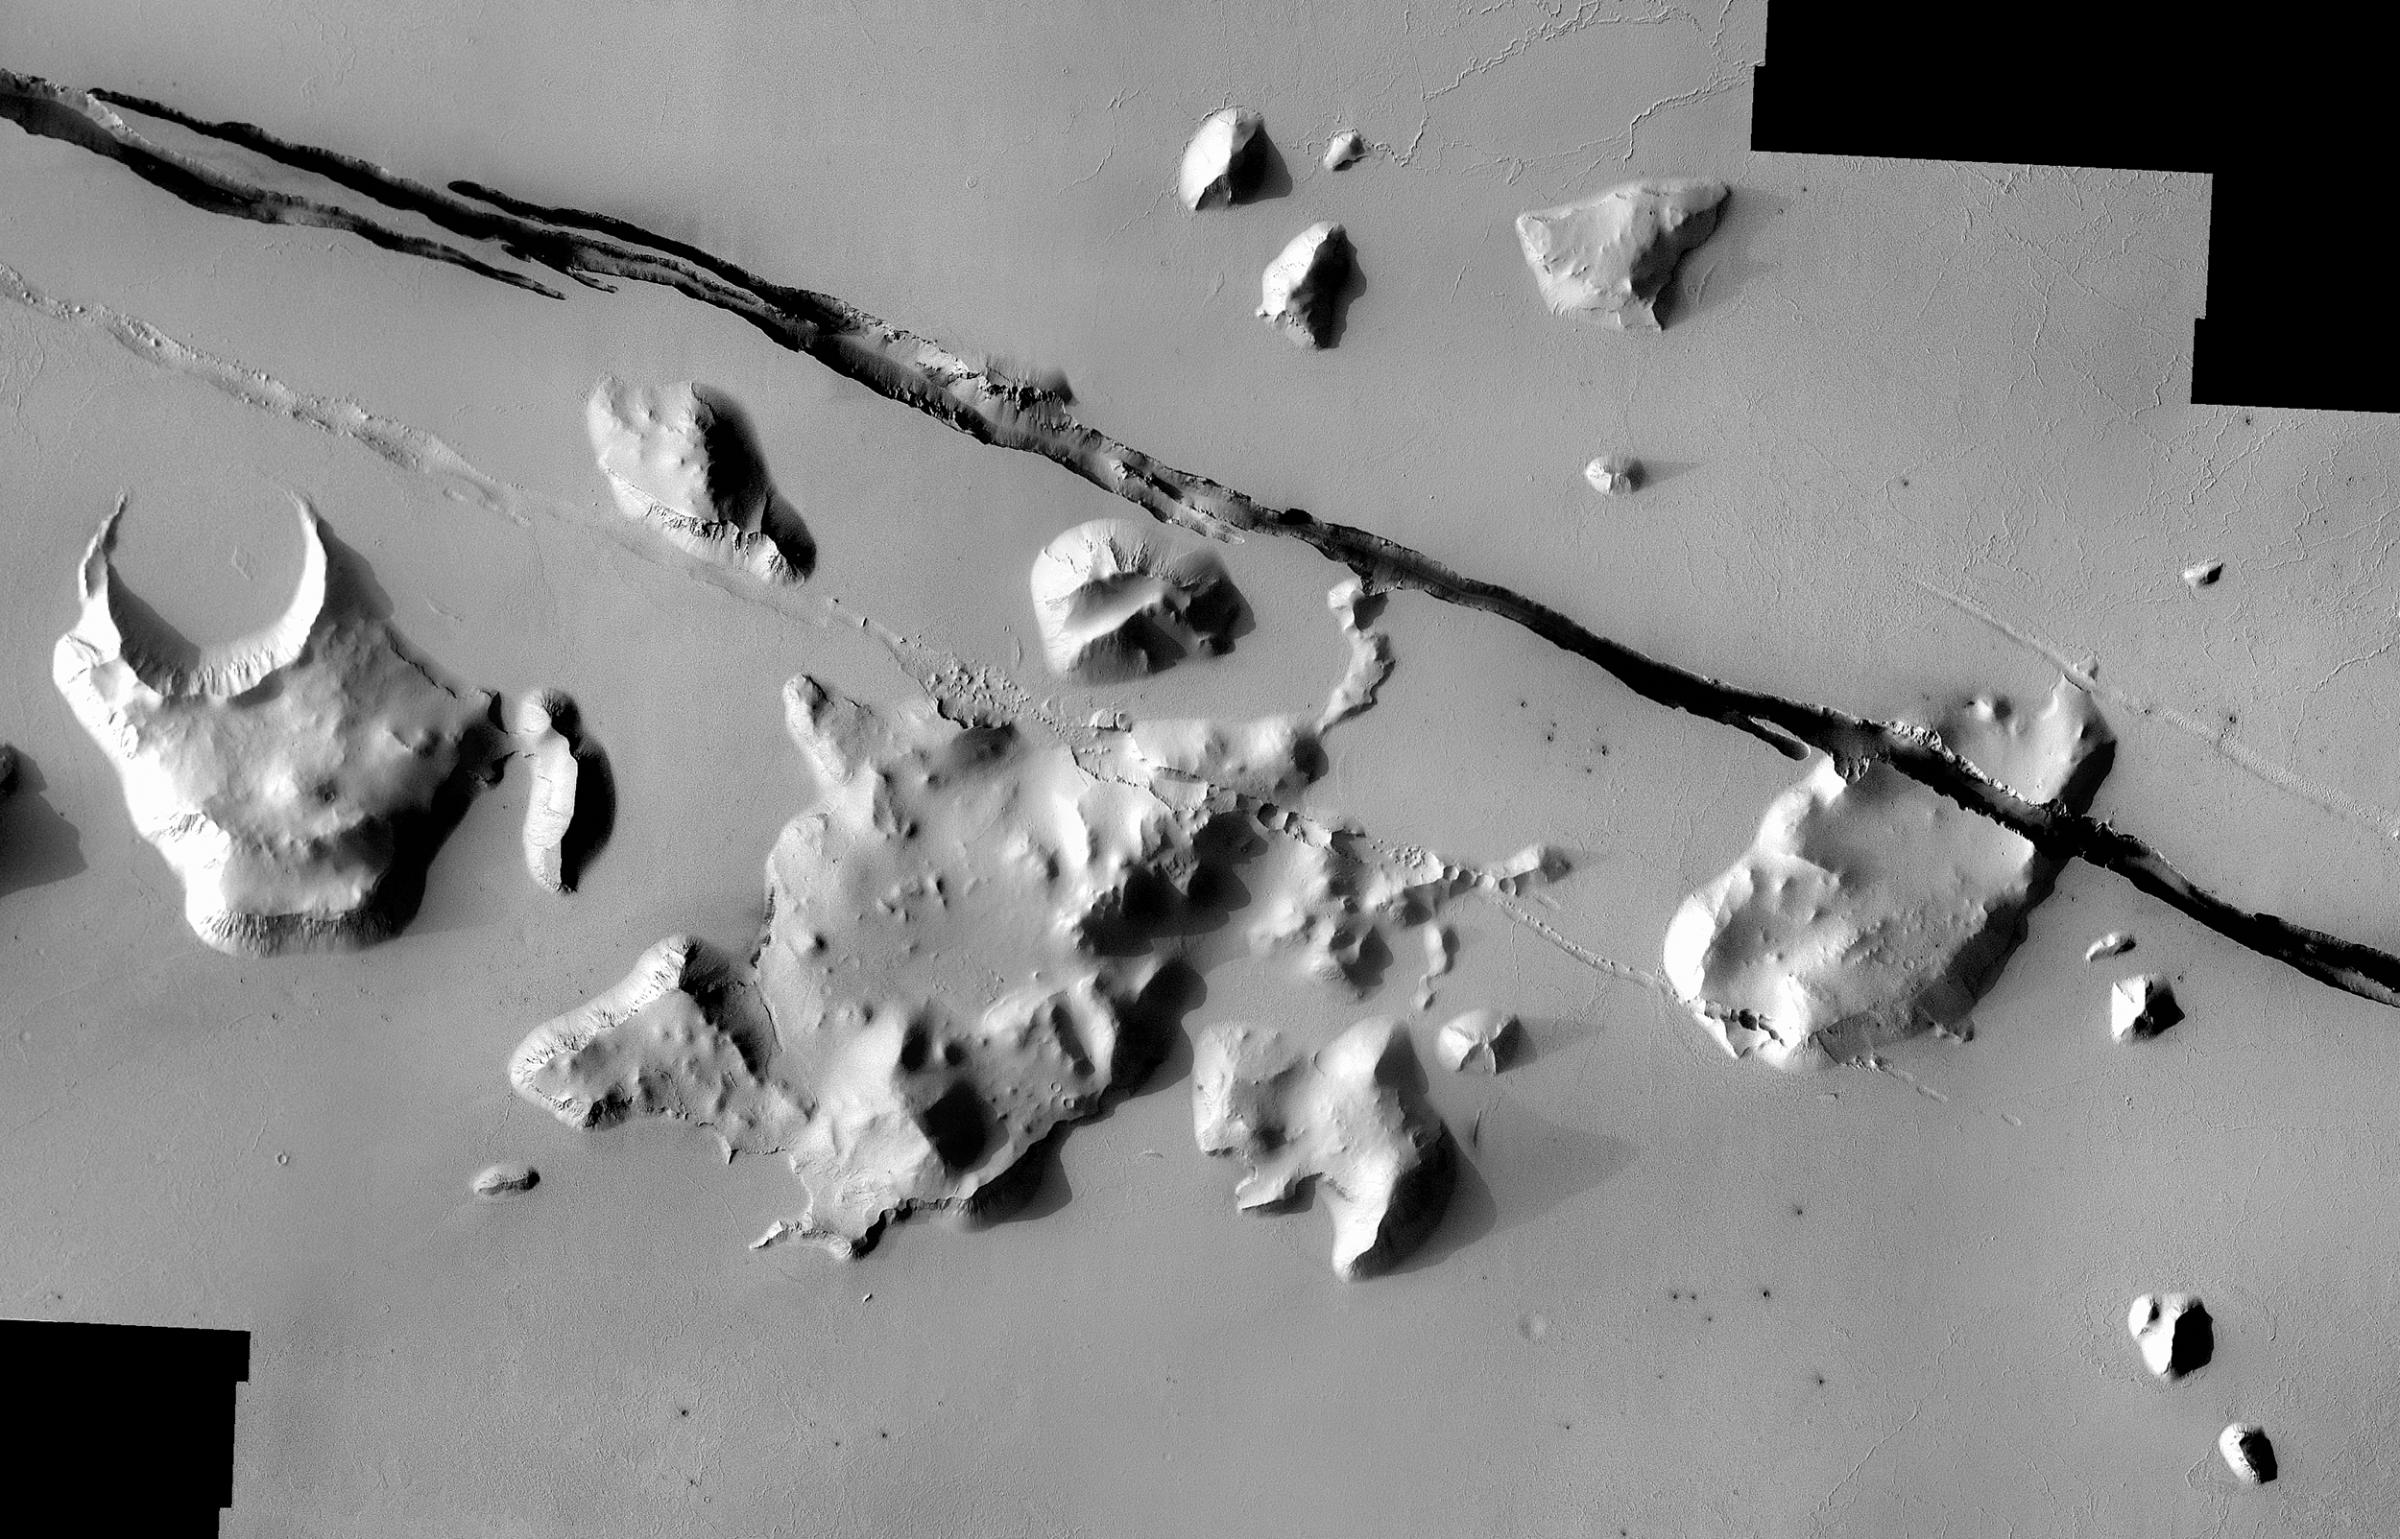 Geological faulting has opened cracks in the Cerberus region that slice through flat plains and mesas alike. This view covers an area 35 miles wide. It combines images taken during the period from May 2002 to July 2004 by the Thermal Emission Imaging System instrument on NASA's Mars Odyssey orbiter.